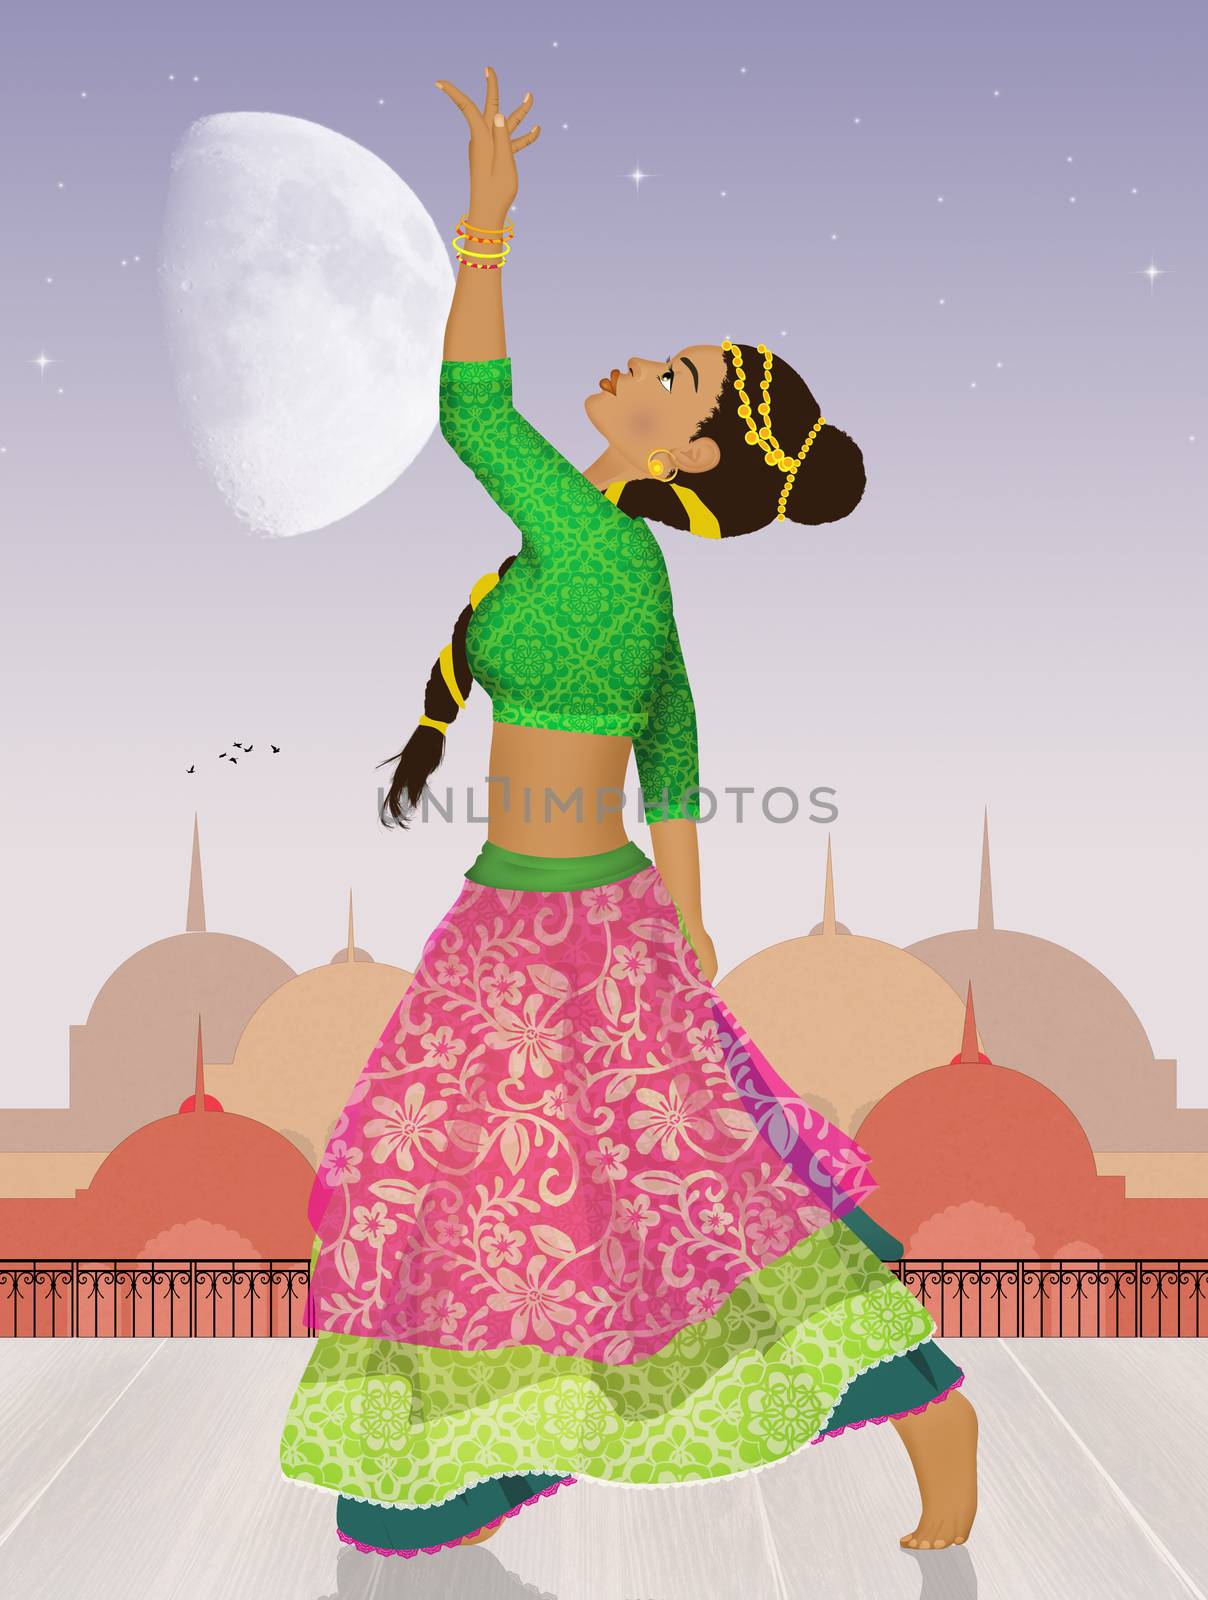 illustration of woman dancing the Bollywood Indian dance